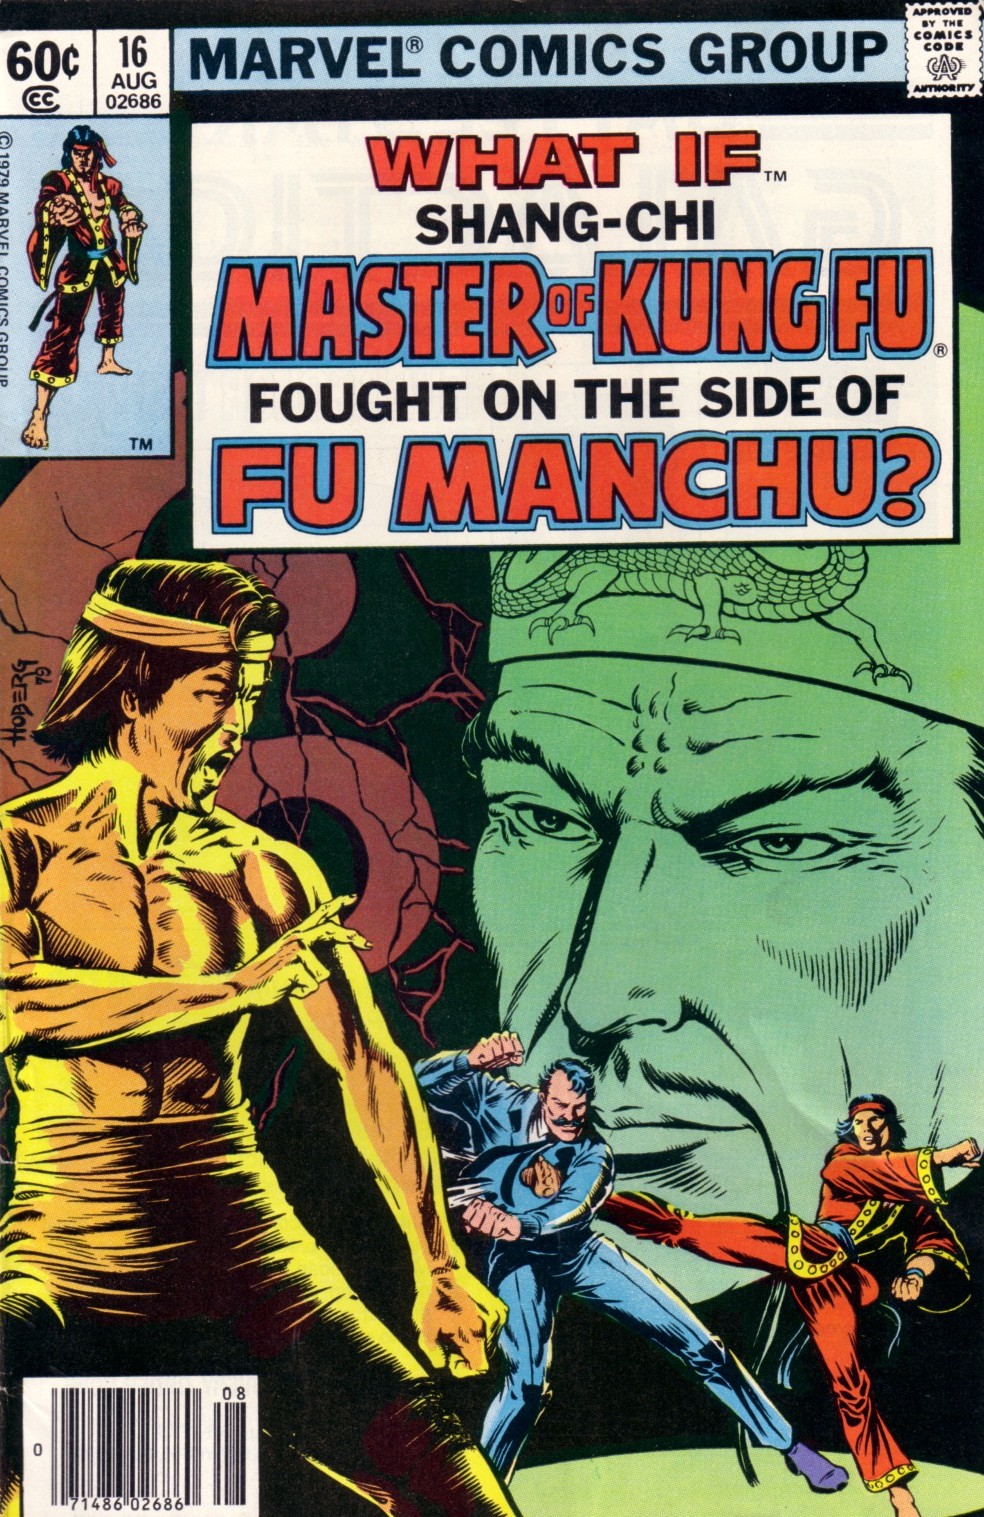 Shang Chi Master of Kung Fu fought on the